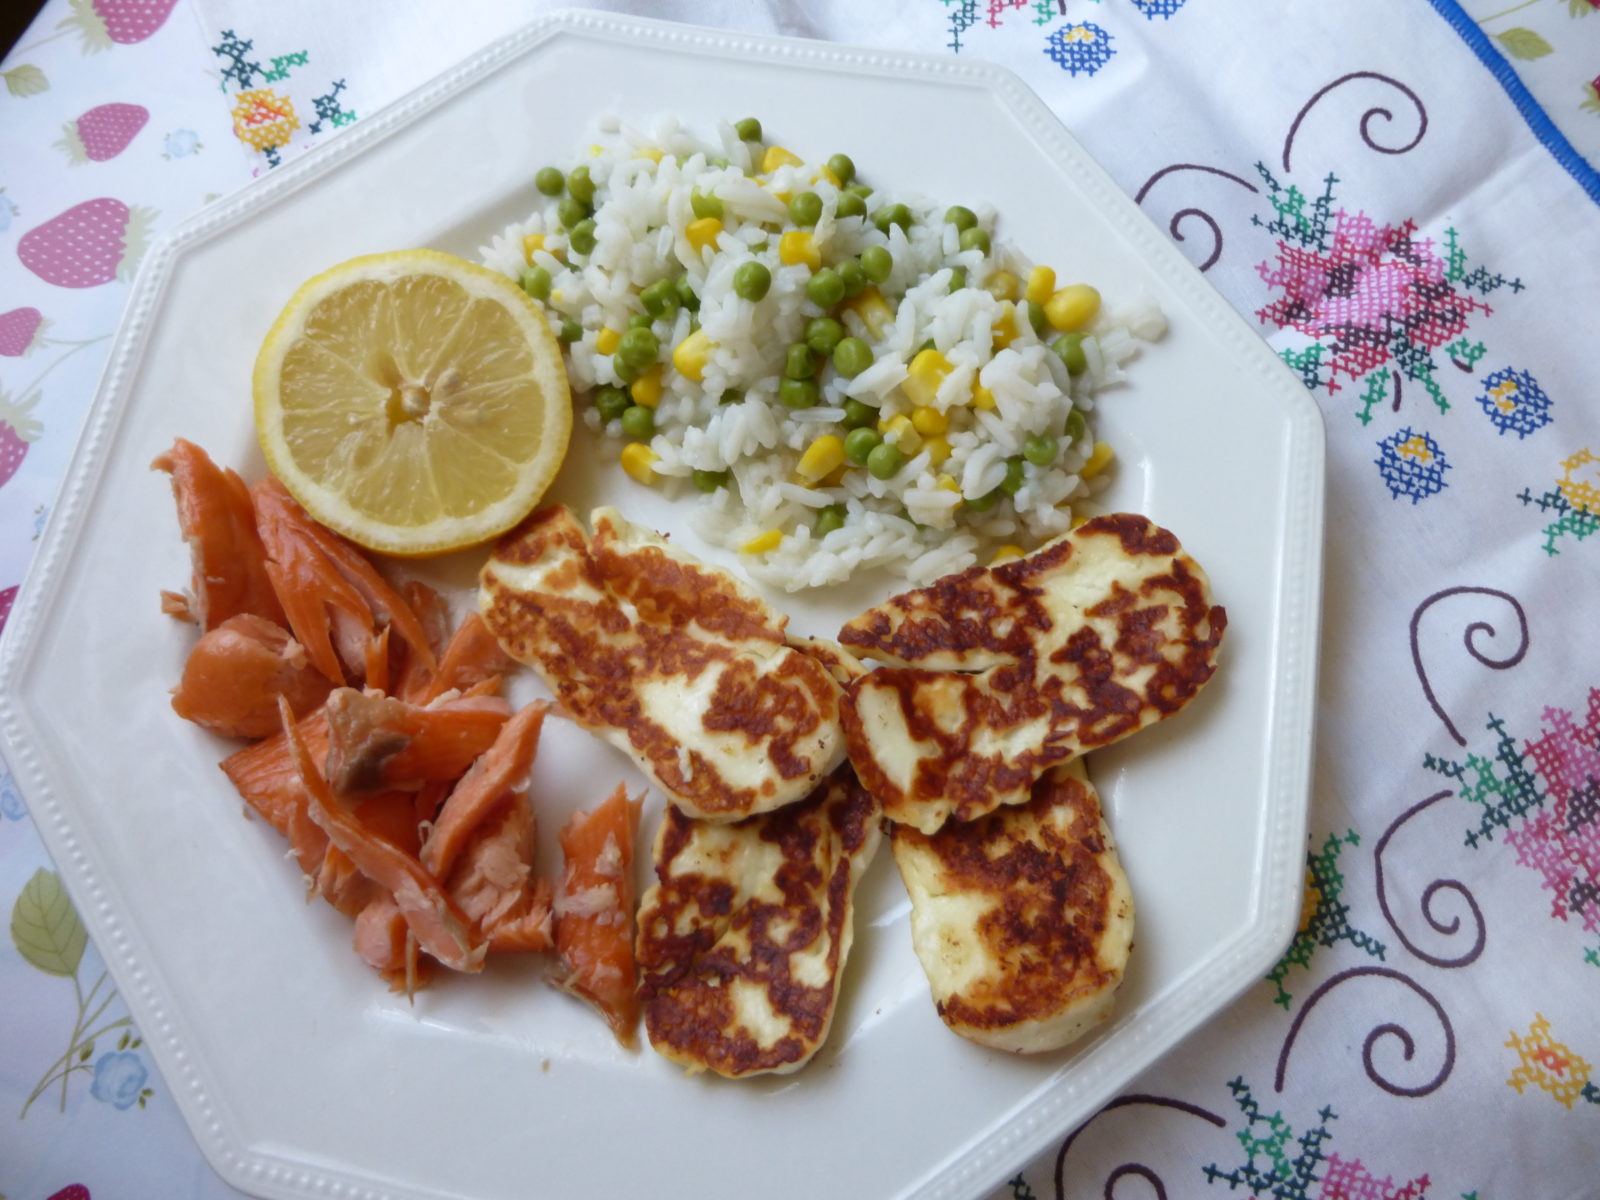 15 minute meals: Honey roast salmon with grilled halloumi and rice!